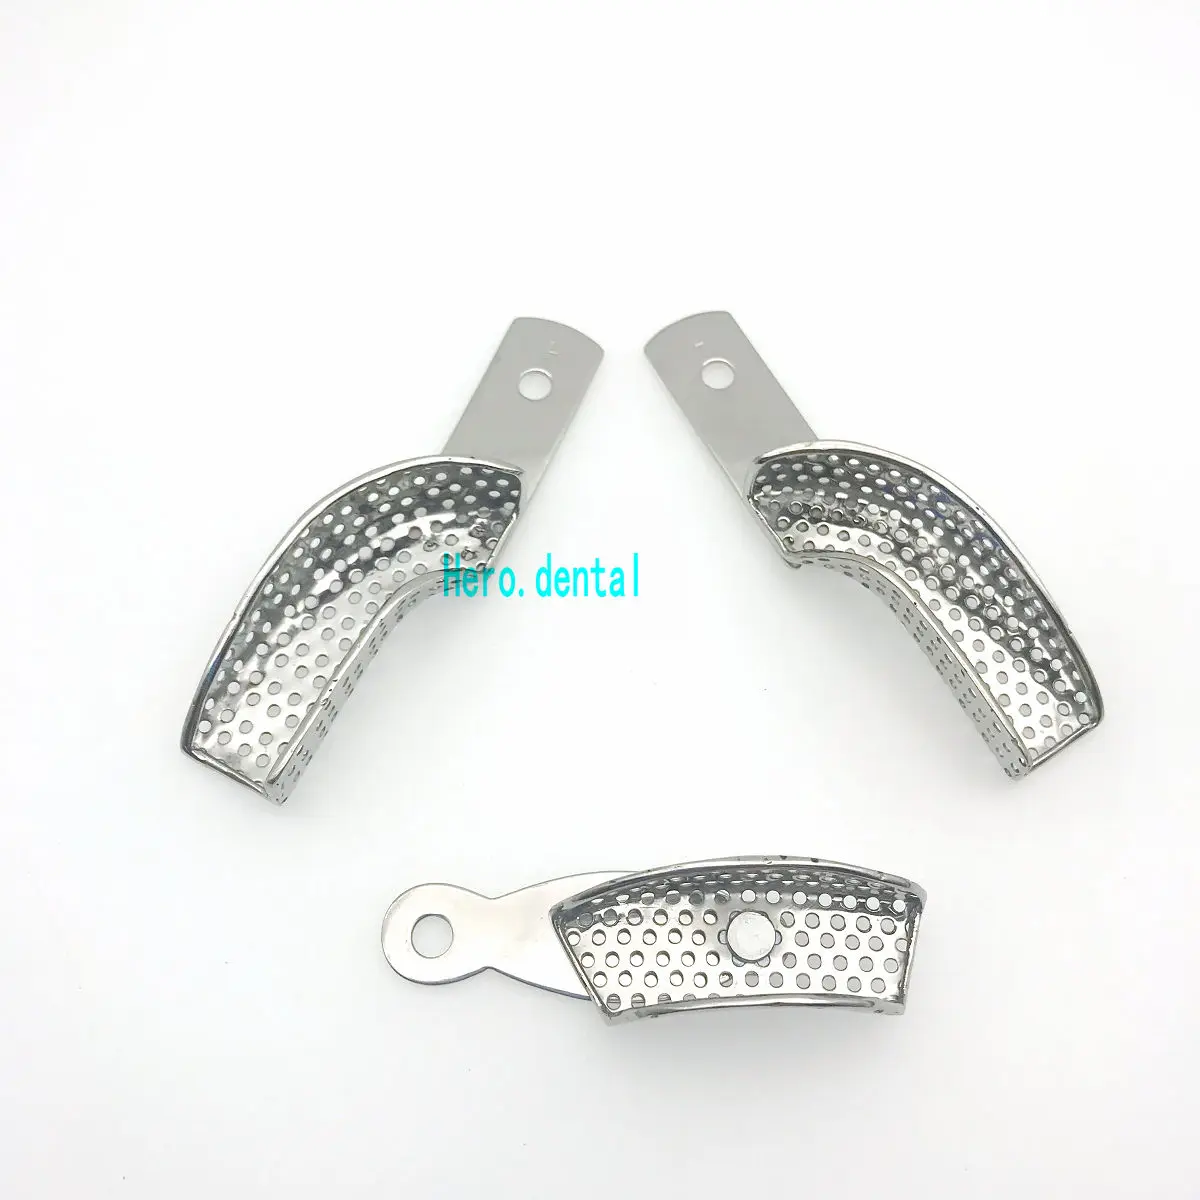 Dental lab partial impression trays stainless steel-set of 3 dental impression tray